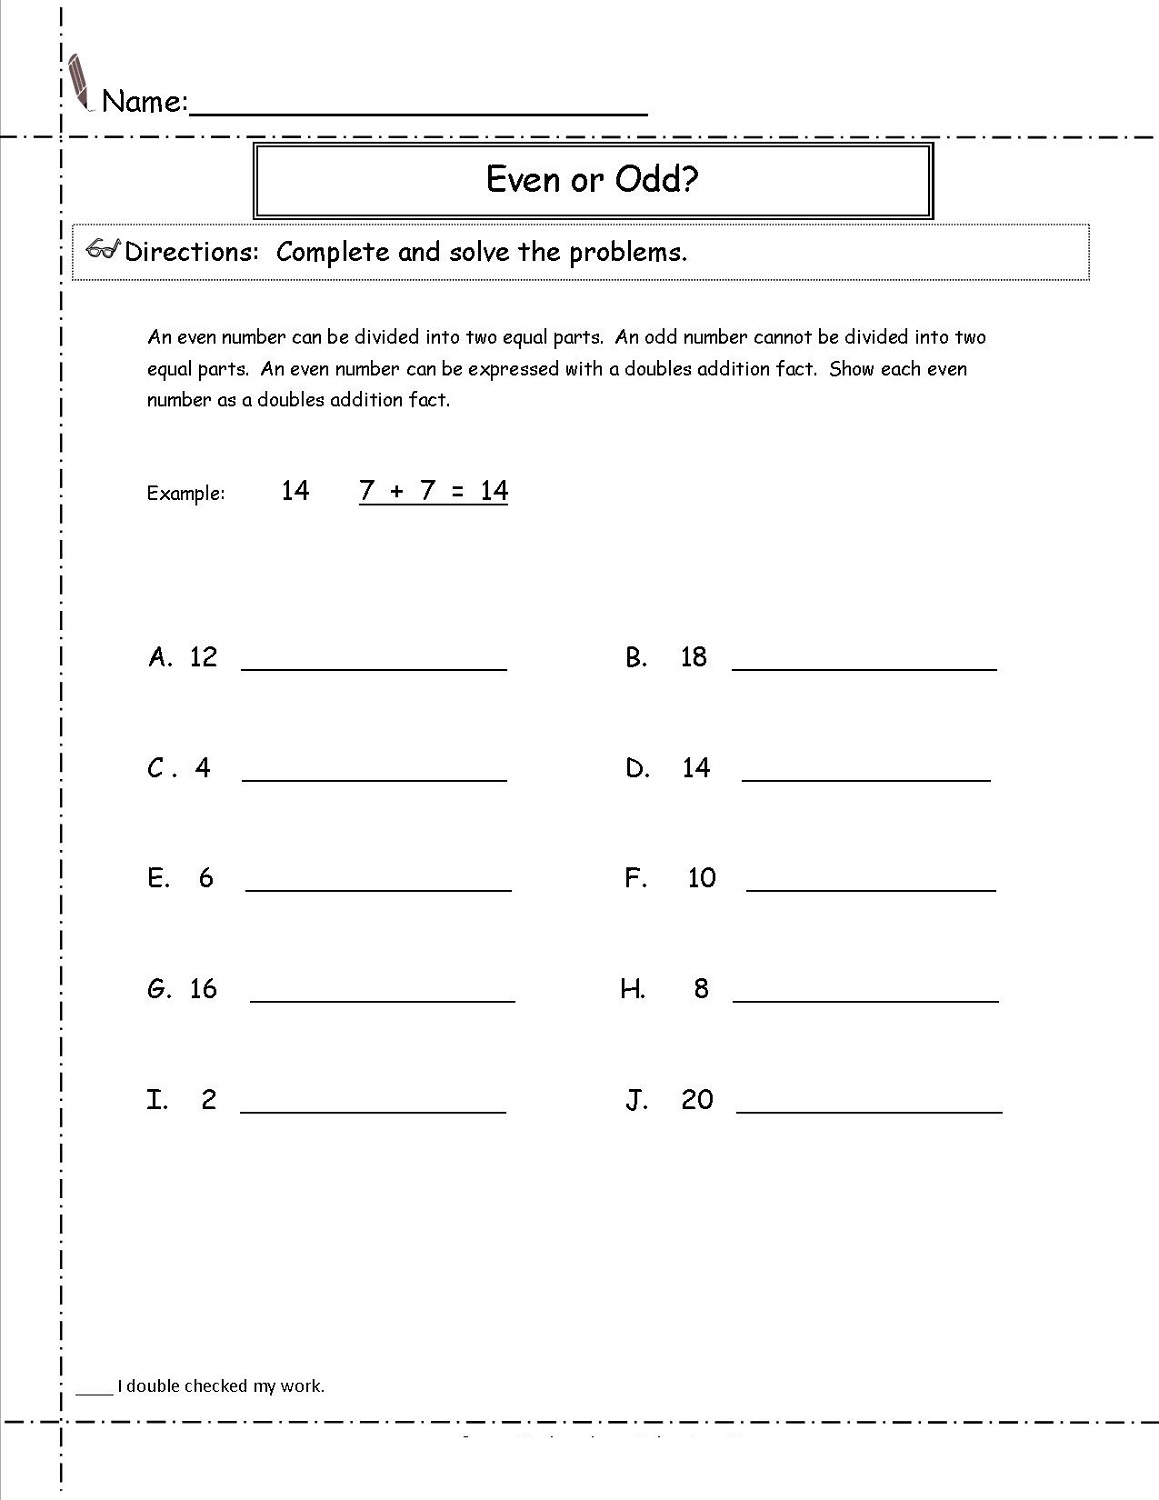 odd and even numbers worksheets large